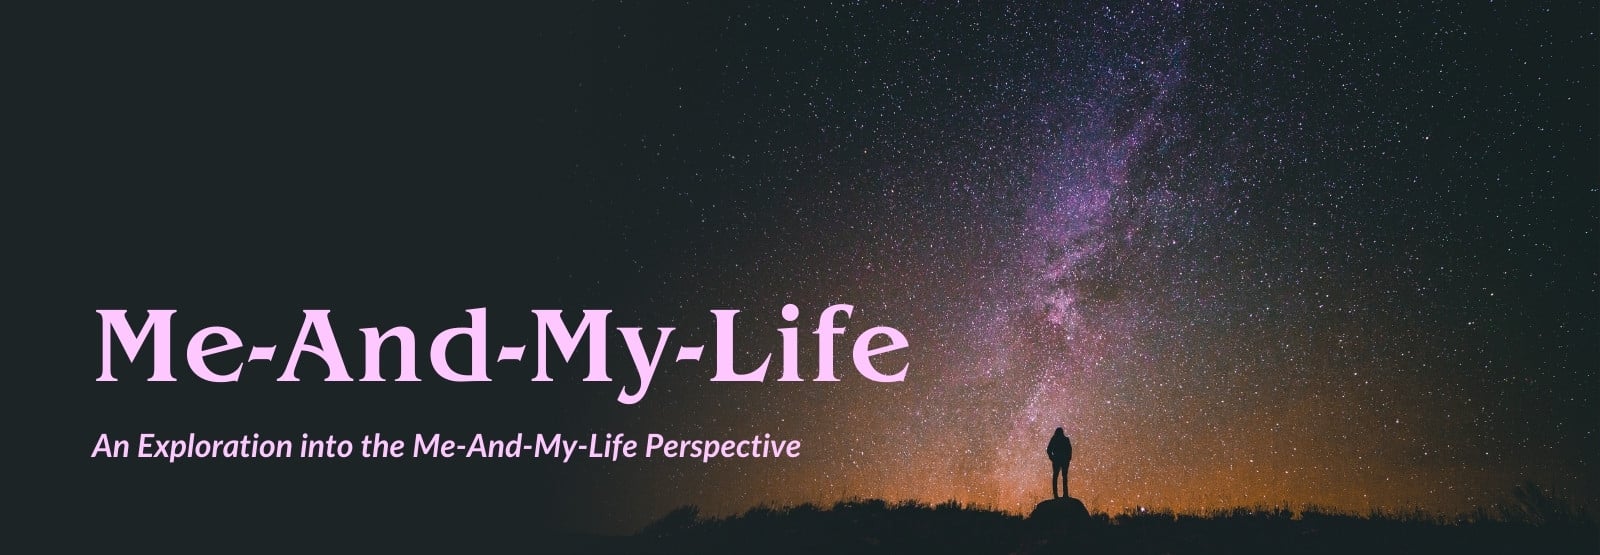 Me-And-My-Life course banner